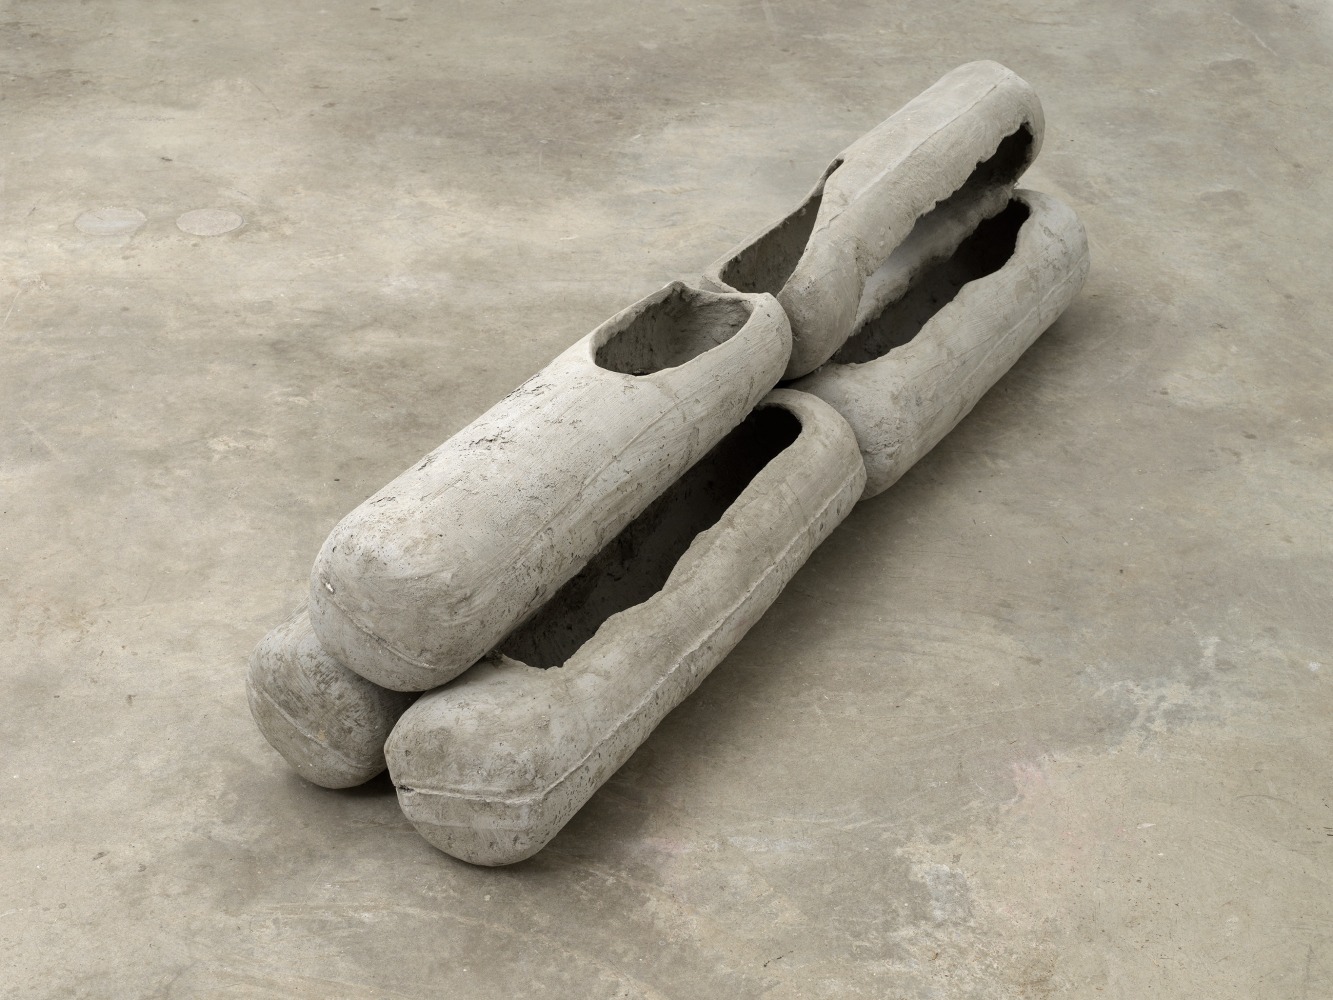 Mire Lee (b. 1988)

Horizontal Forms: cushions, 2020-2022 (ongoing)

Concrete

63.5 x 15.5 x 15 inches

38.1 x 39.4 x 161.3 cm